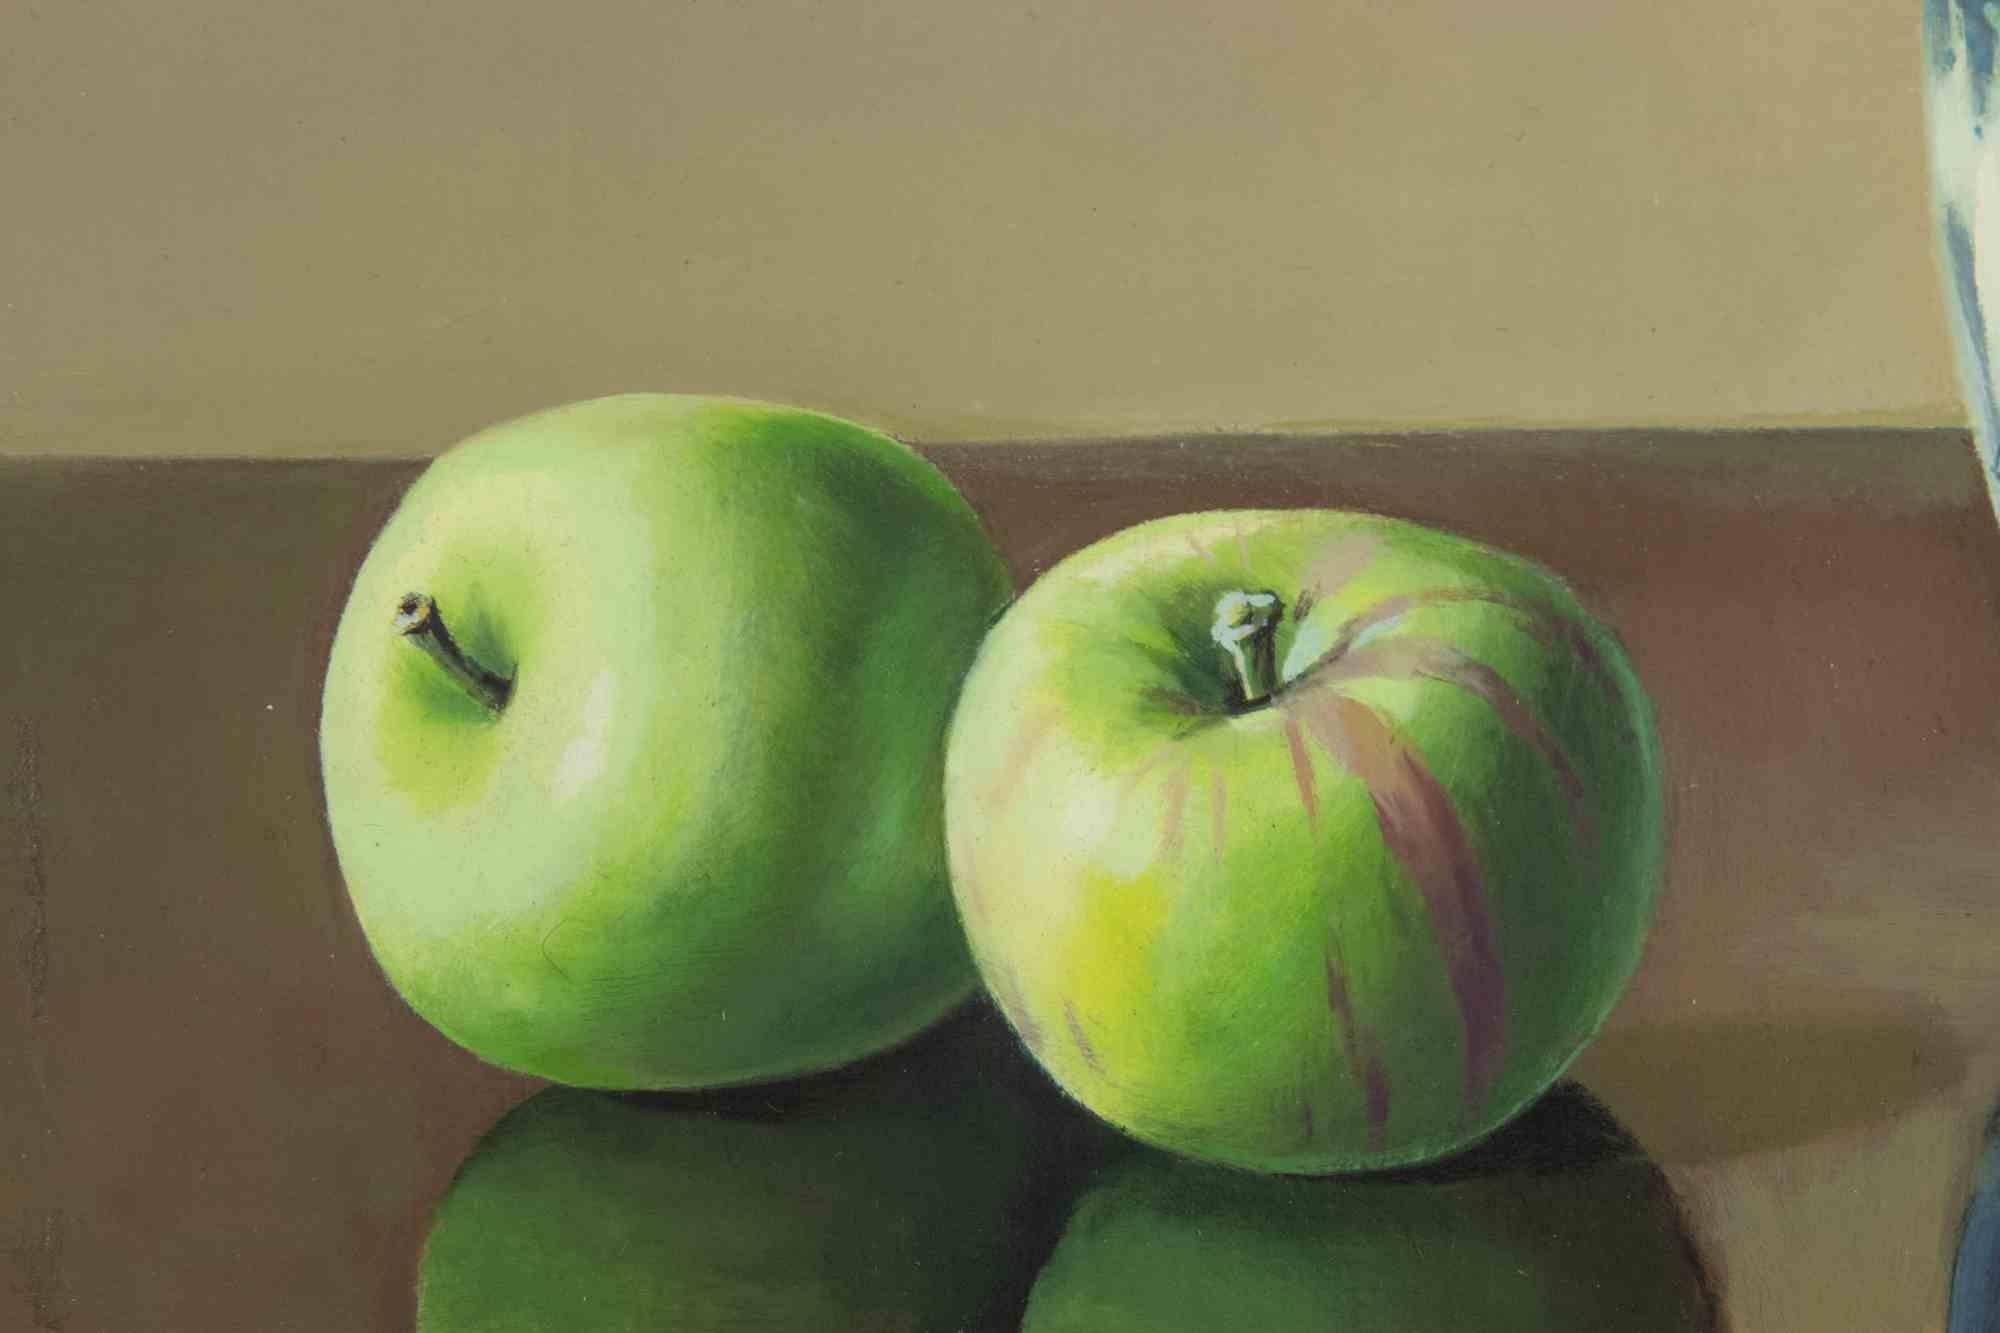 Green Apples on Table - Oil Painting by Zhang Wei Guang - 2010s For Sale 3